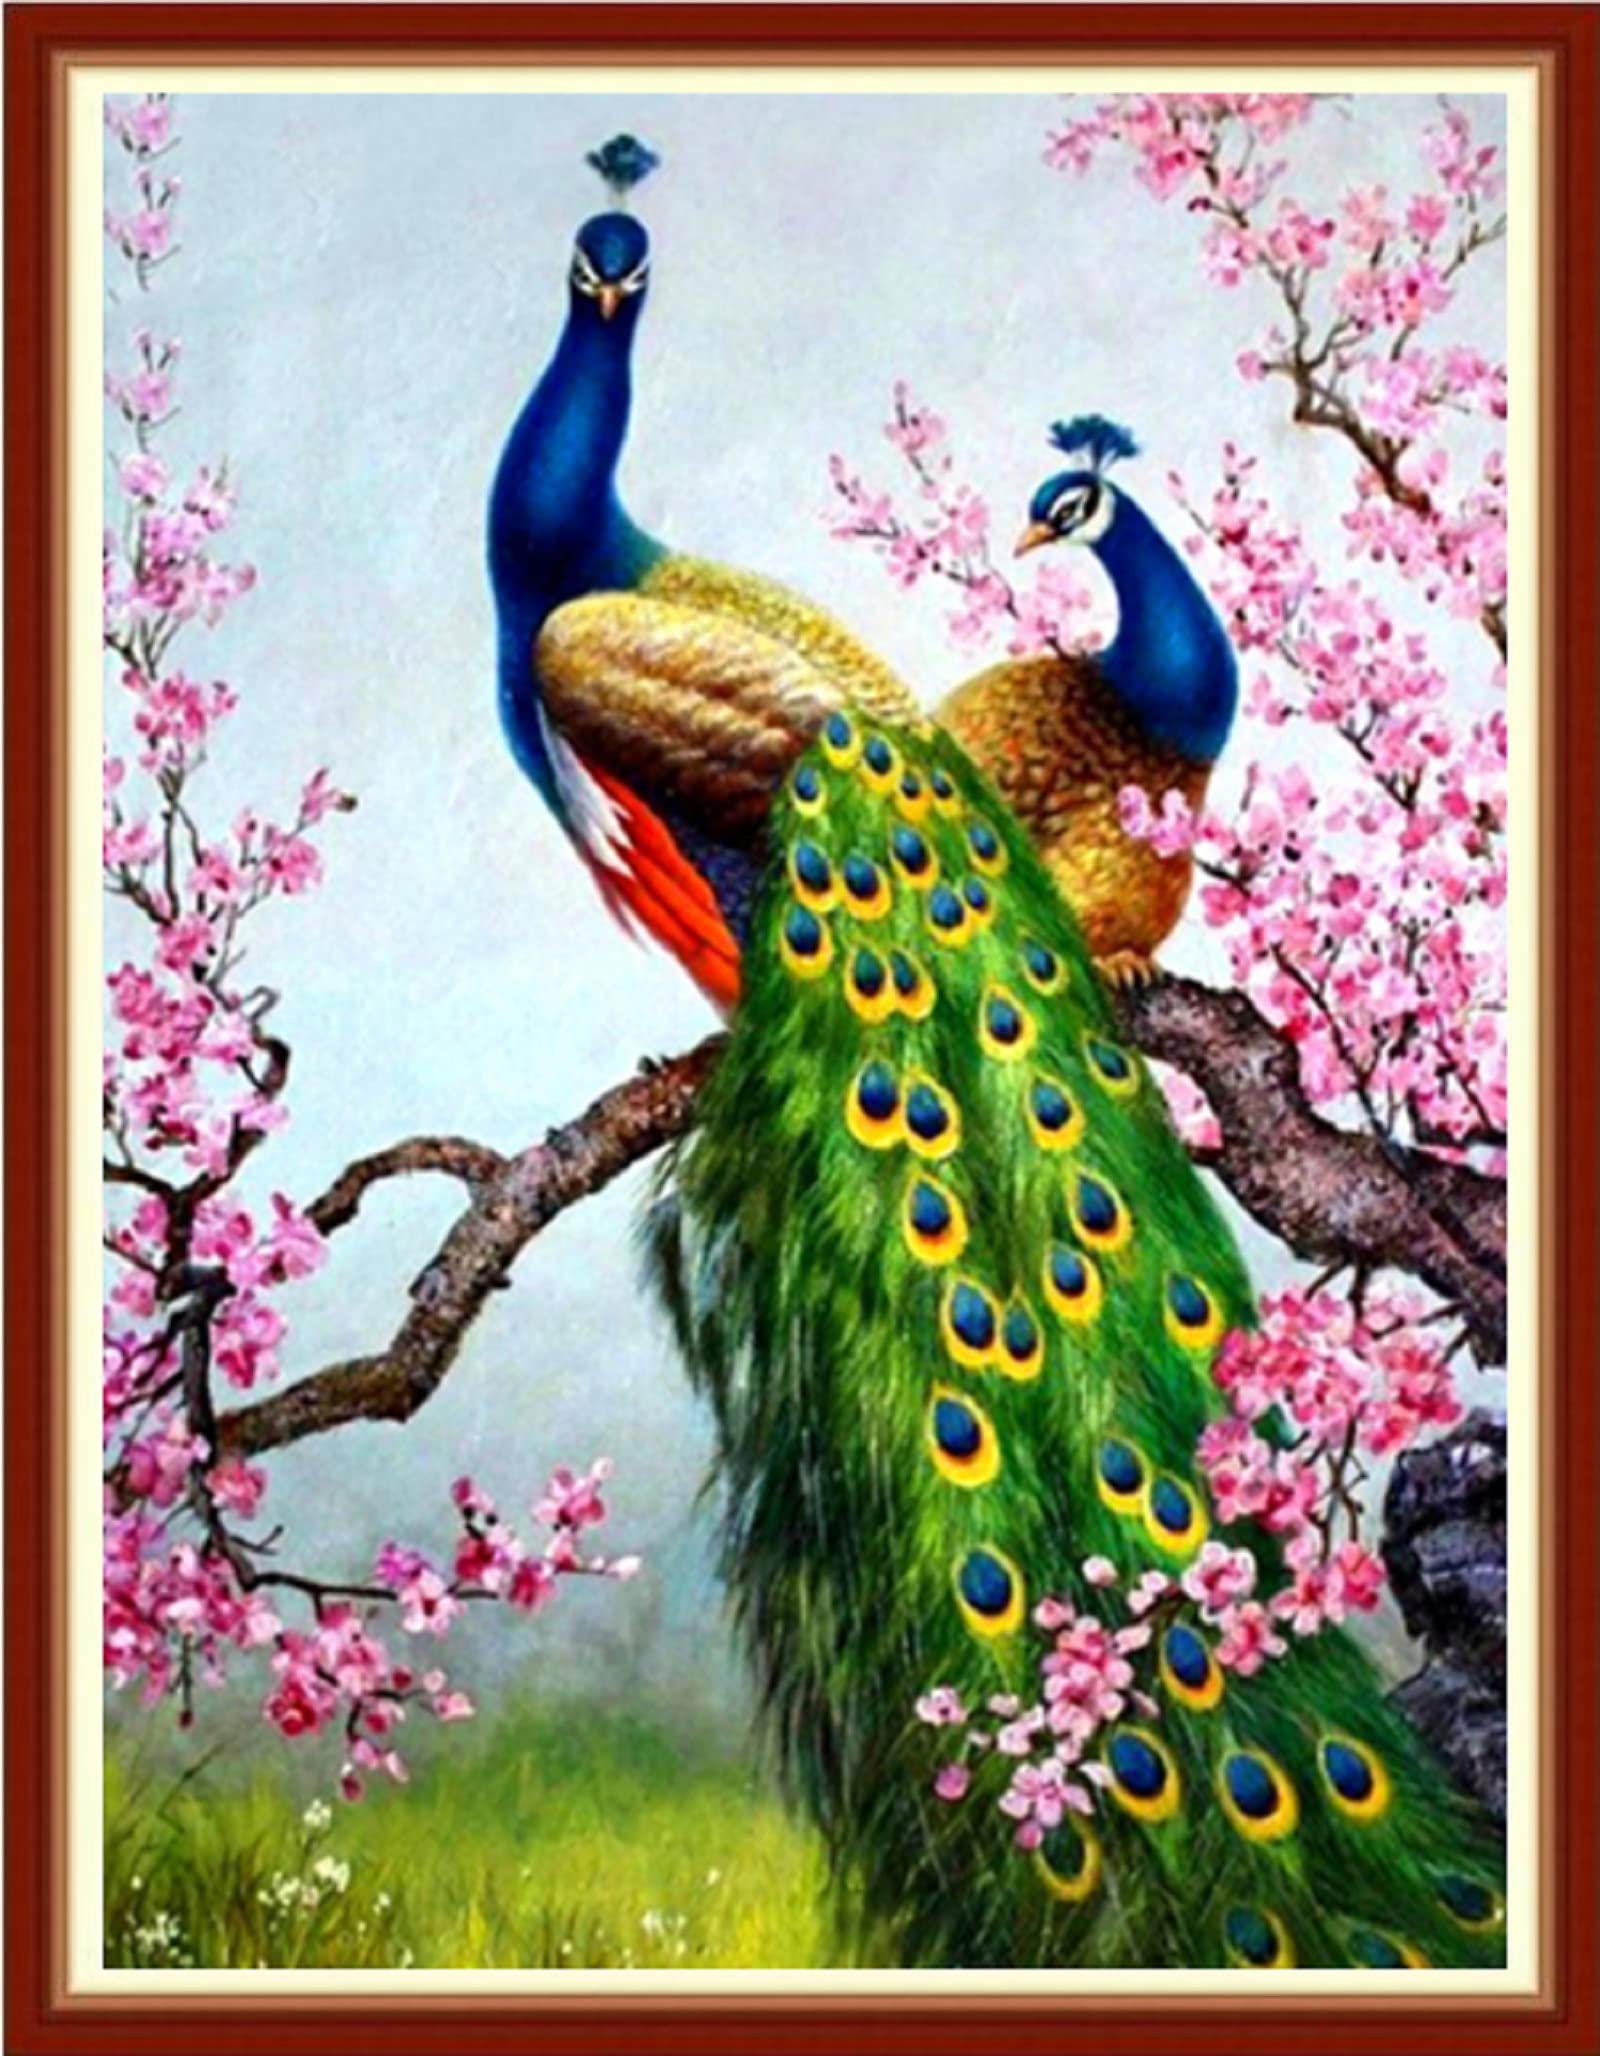 Paintcolor Peacock Stamped Cross Stitch Kits for Adults Beginners Animals Art DIY Cross Stitch Patterns Kits Printed Dimensions Needlepoint Kitscrafts